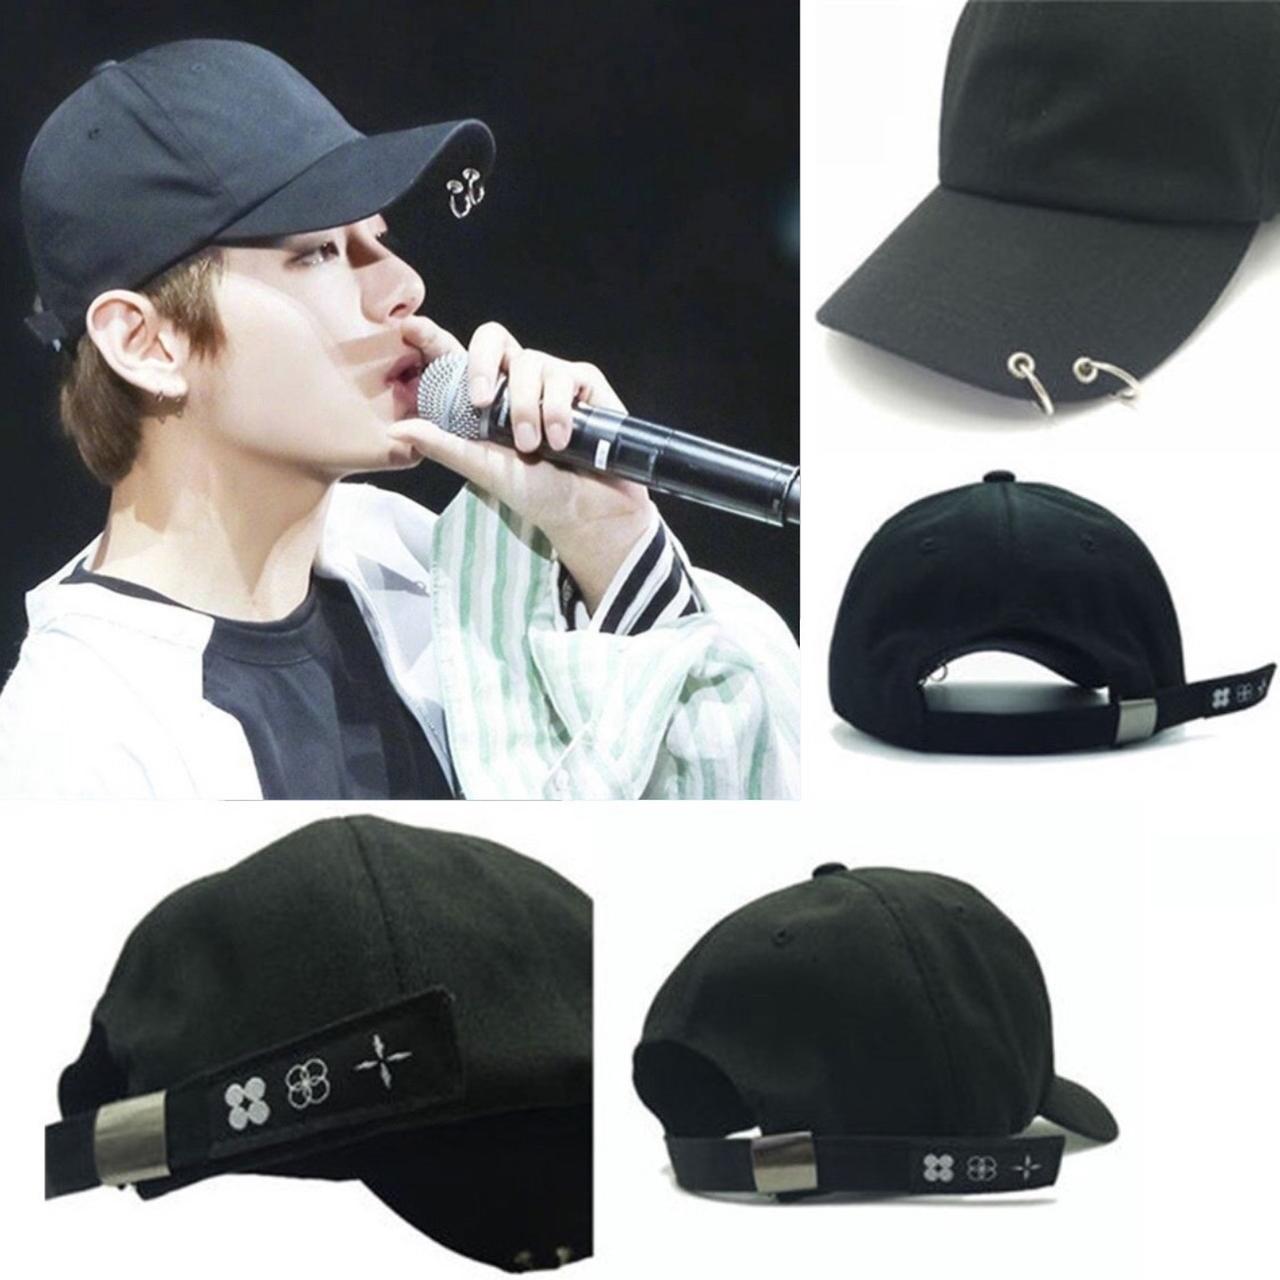 Product Image 4 - Kpop double ring cap!! 🤭🧢
